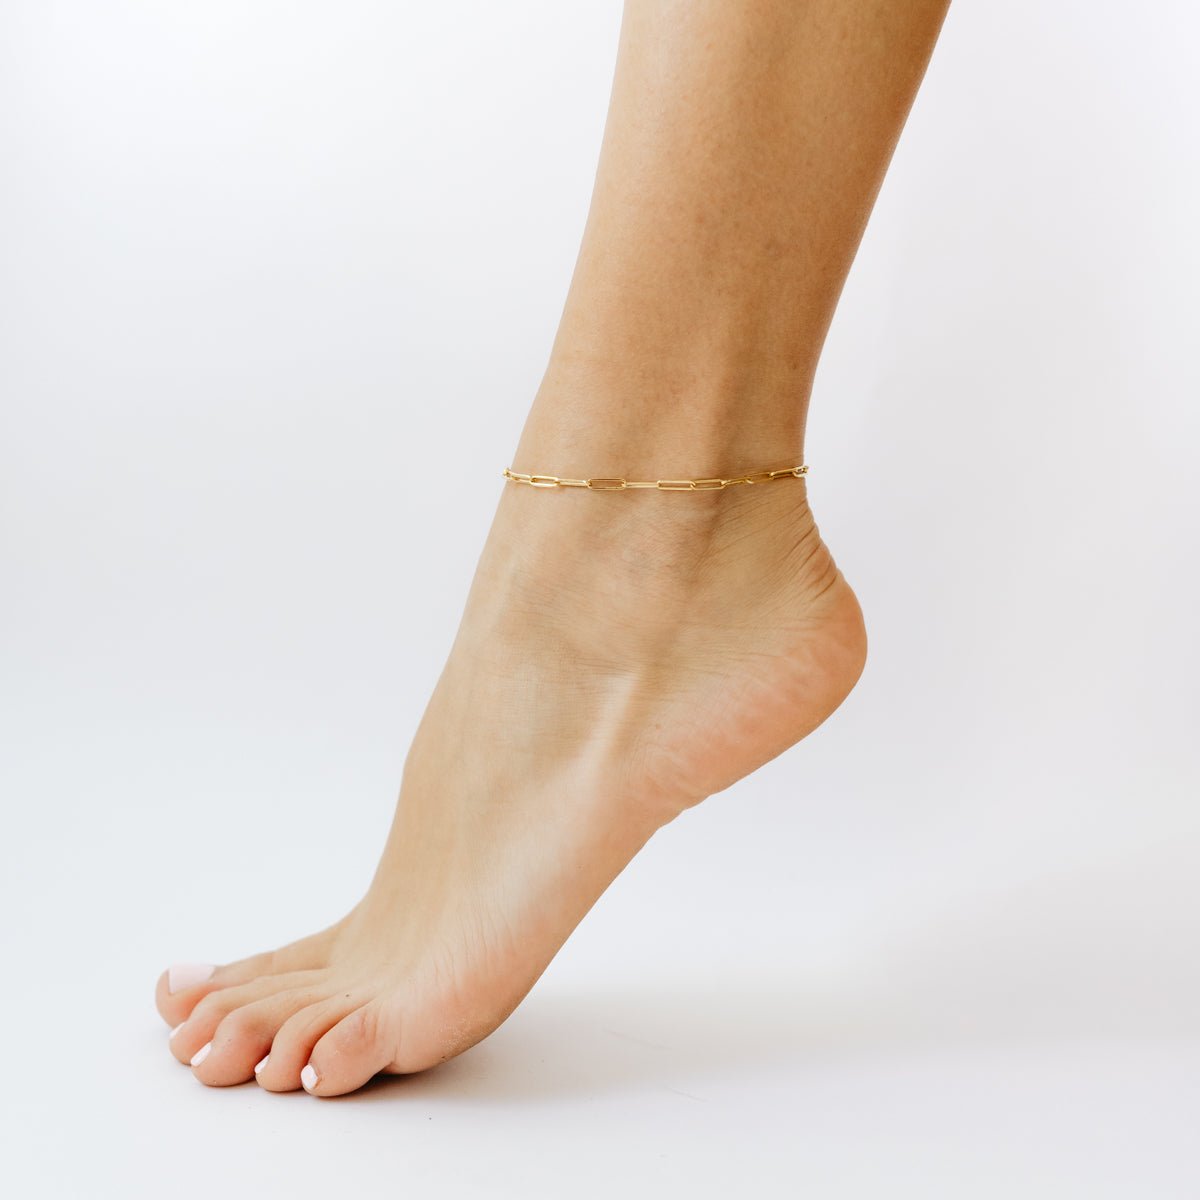 POISE OVAL LINK ANKLET - GOLD - SO PRETTY CARA COTTER